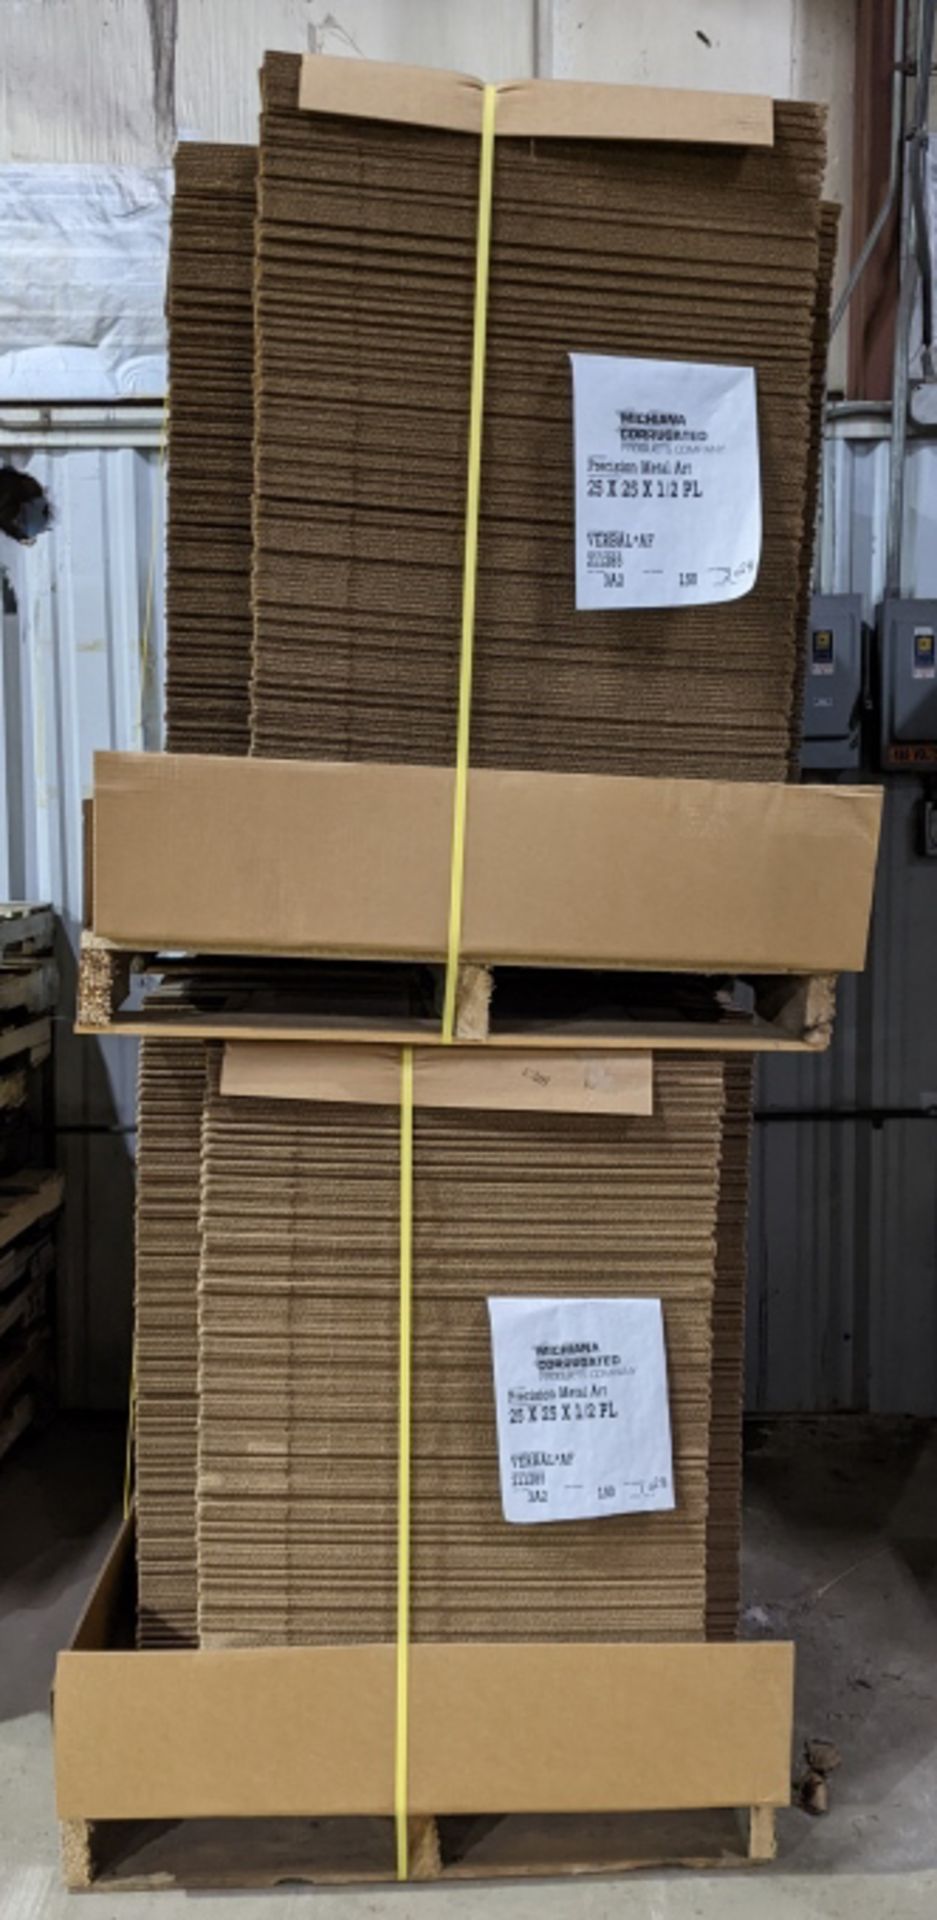 Michiana Corrugated Products Co. Shipping Boxes.